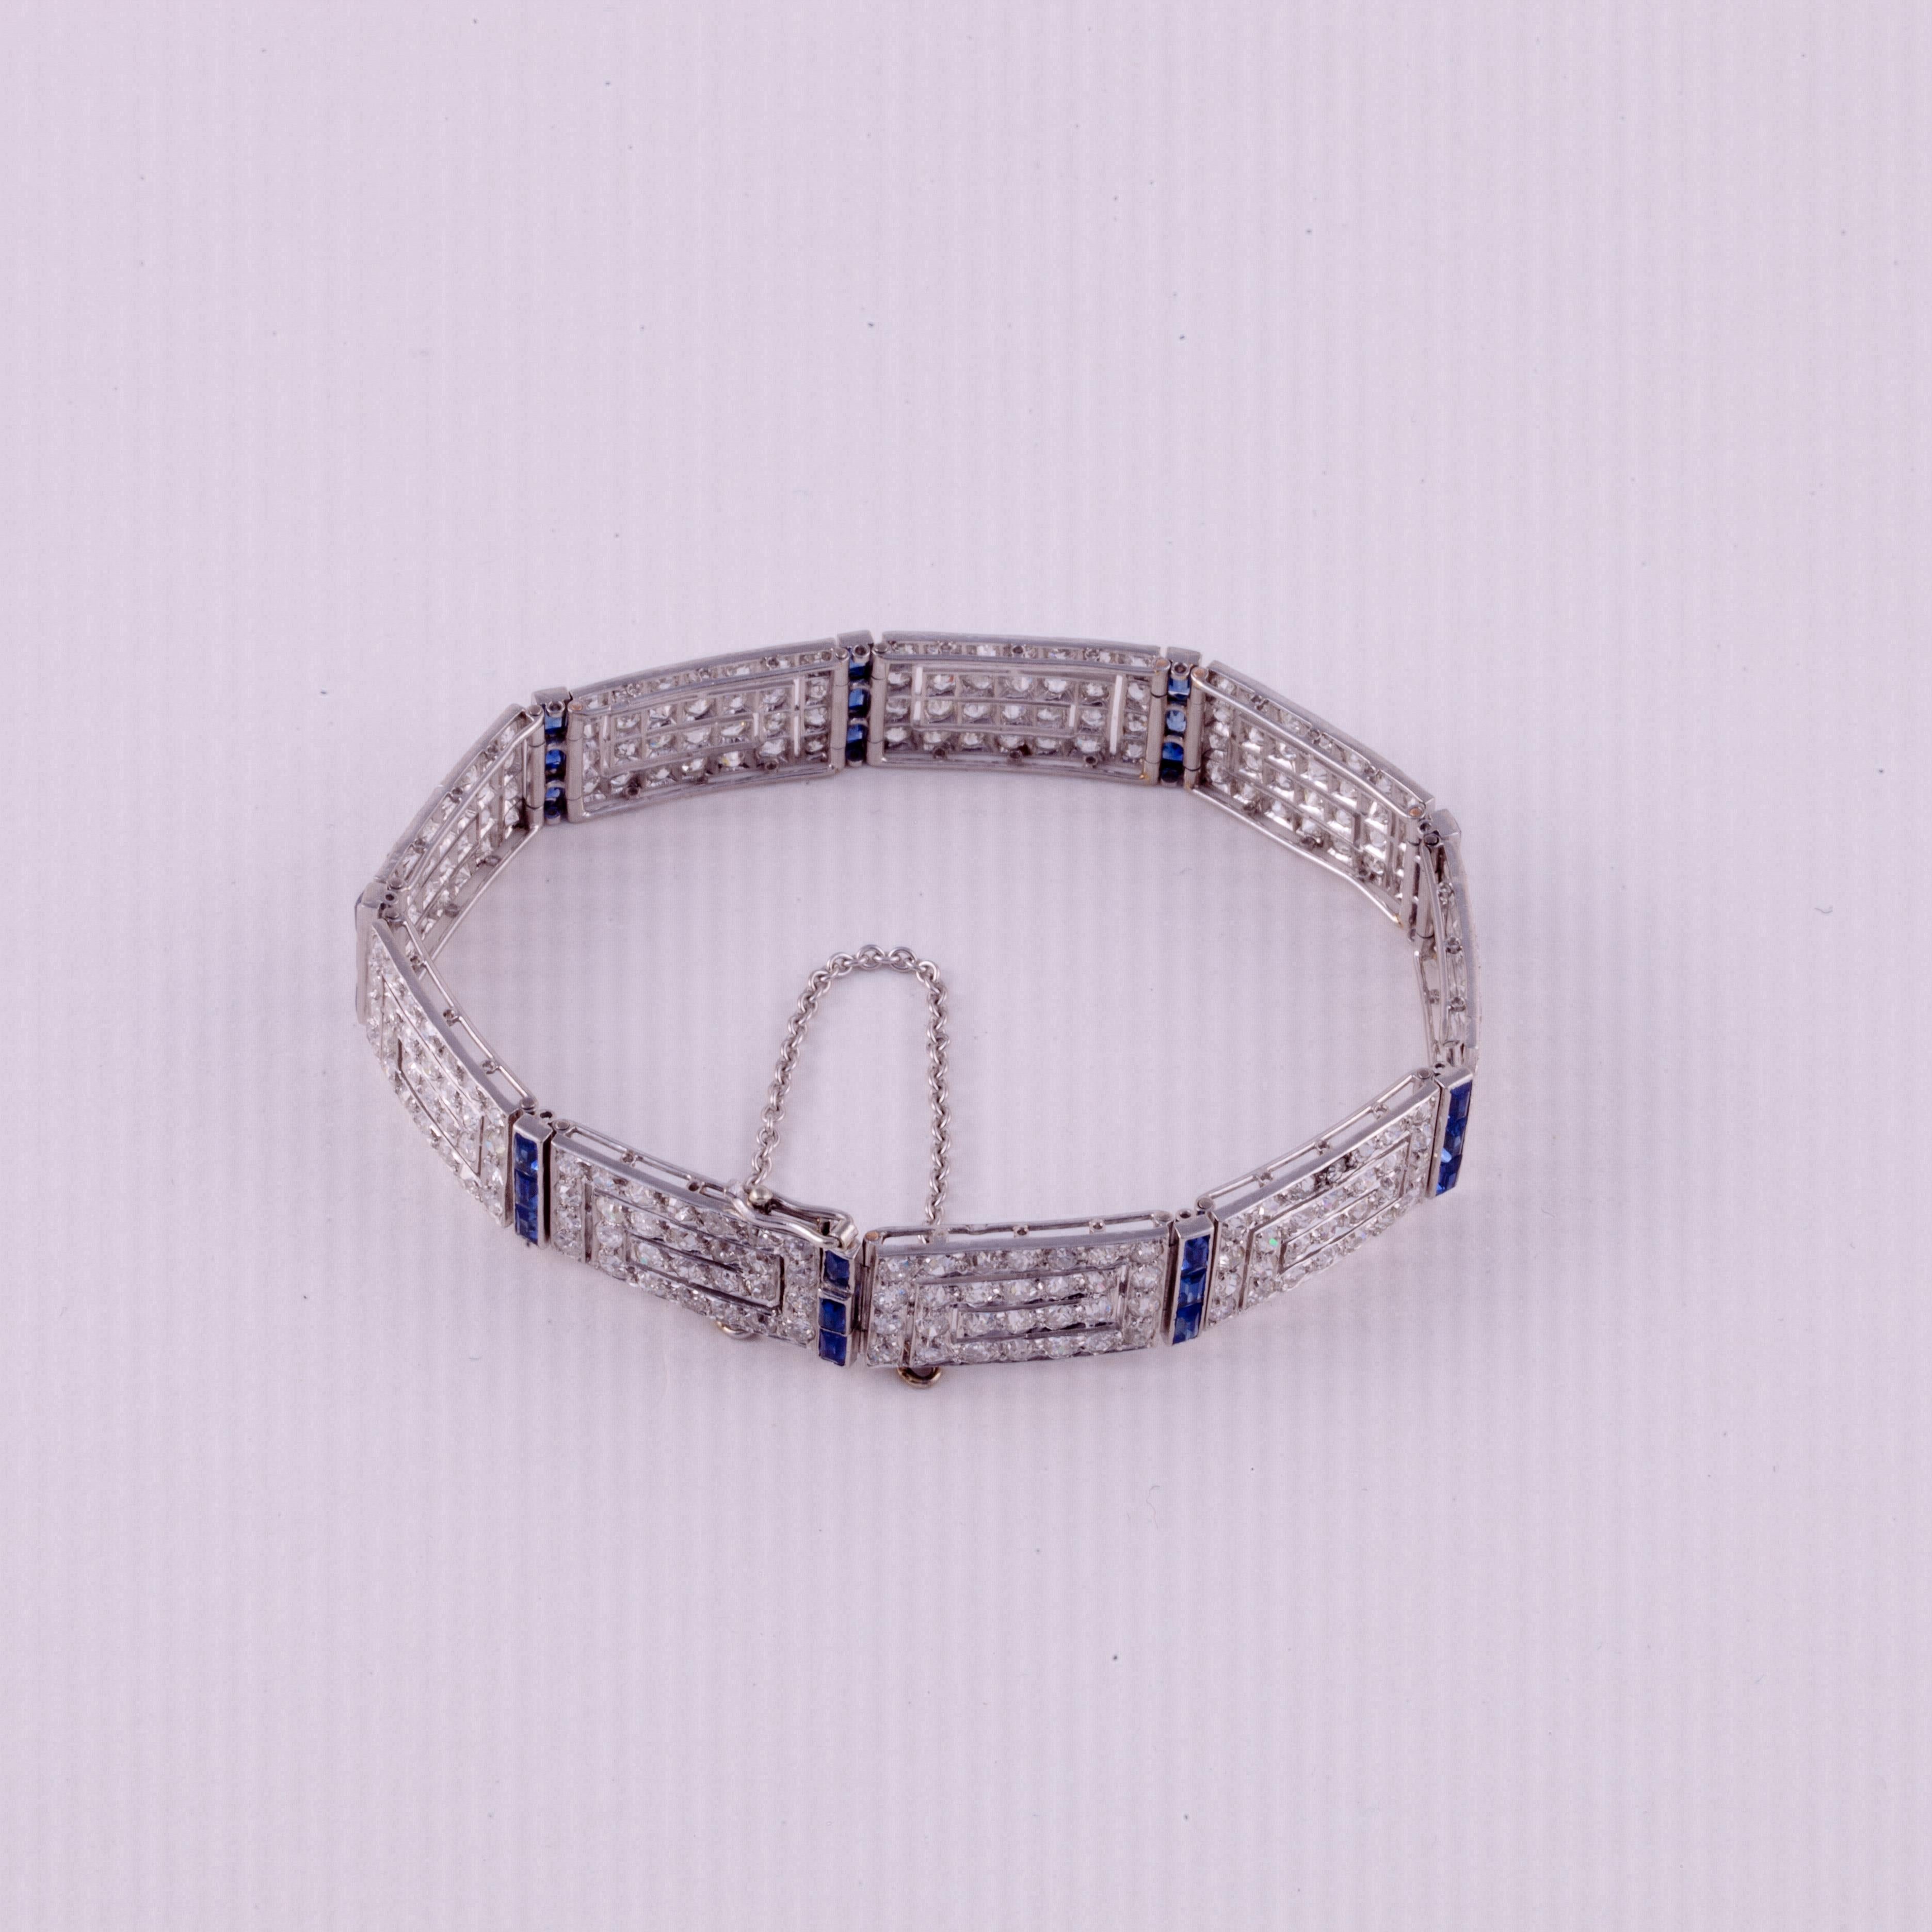 Art Deco bracelet in platinum, 18K white gold, diamonds and accented with blue sapphires. The links are elongated Greek Keys set with diamonds and sapphire bars in between each link.  There are a total of twenty-seven (27) calibré-cut sapphires 